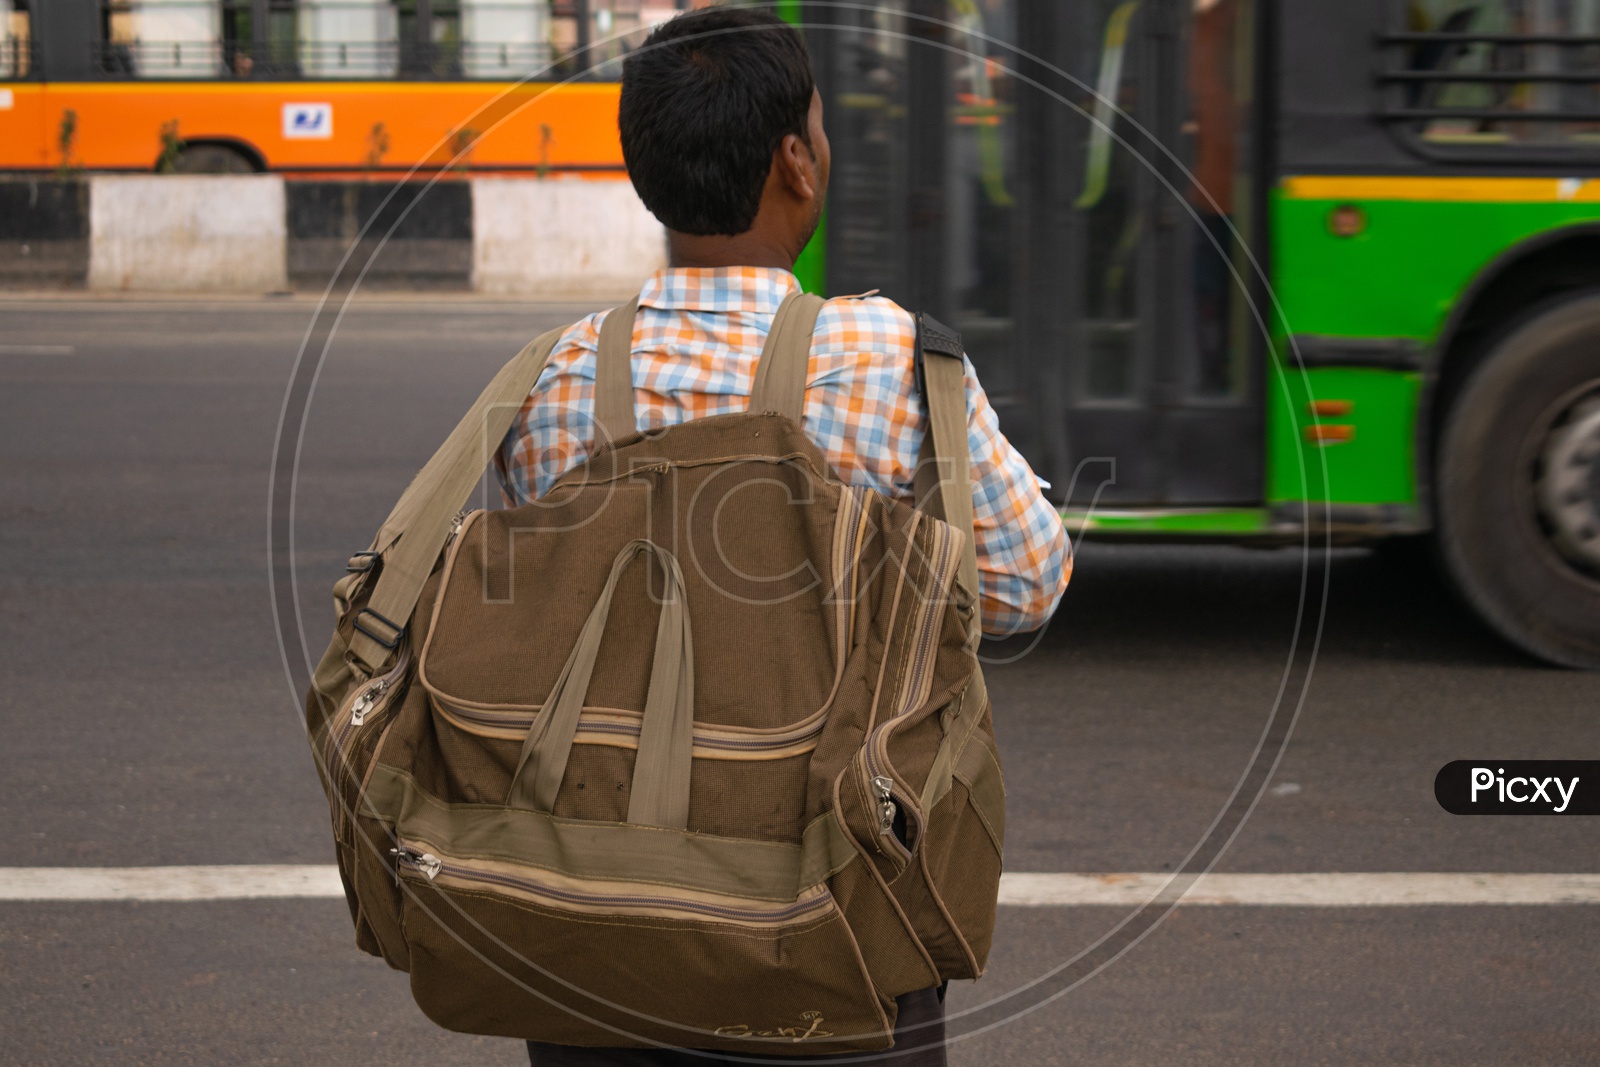 A man holding bag waiting for bus